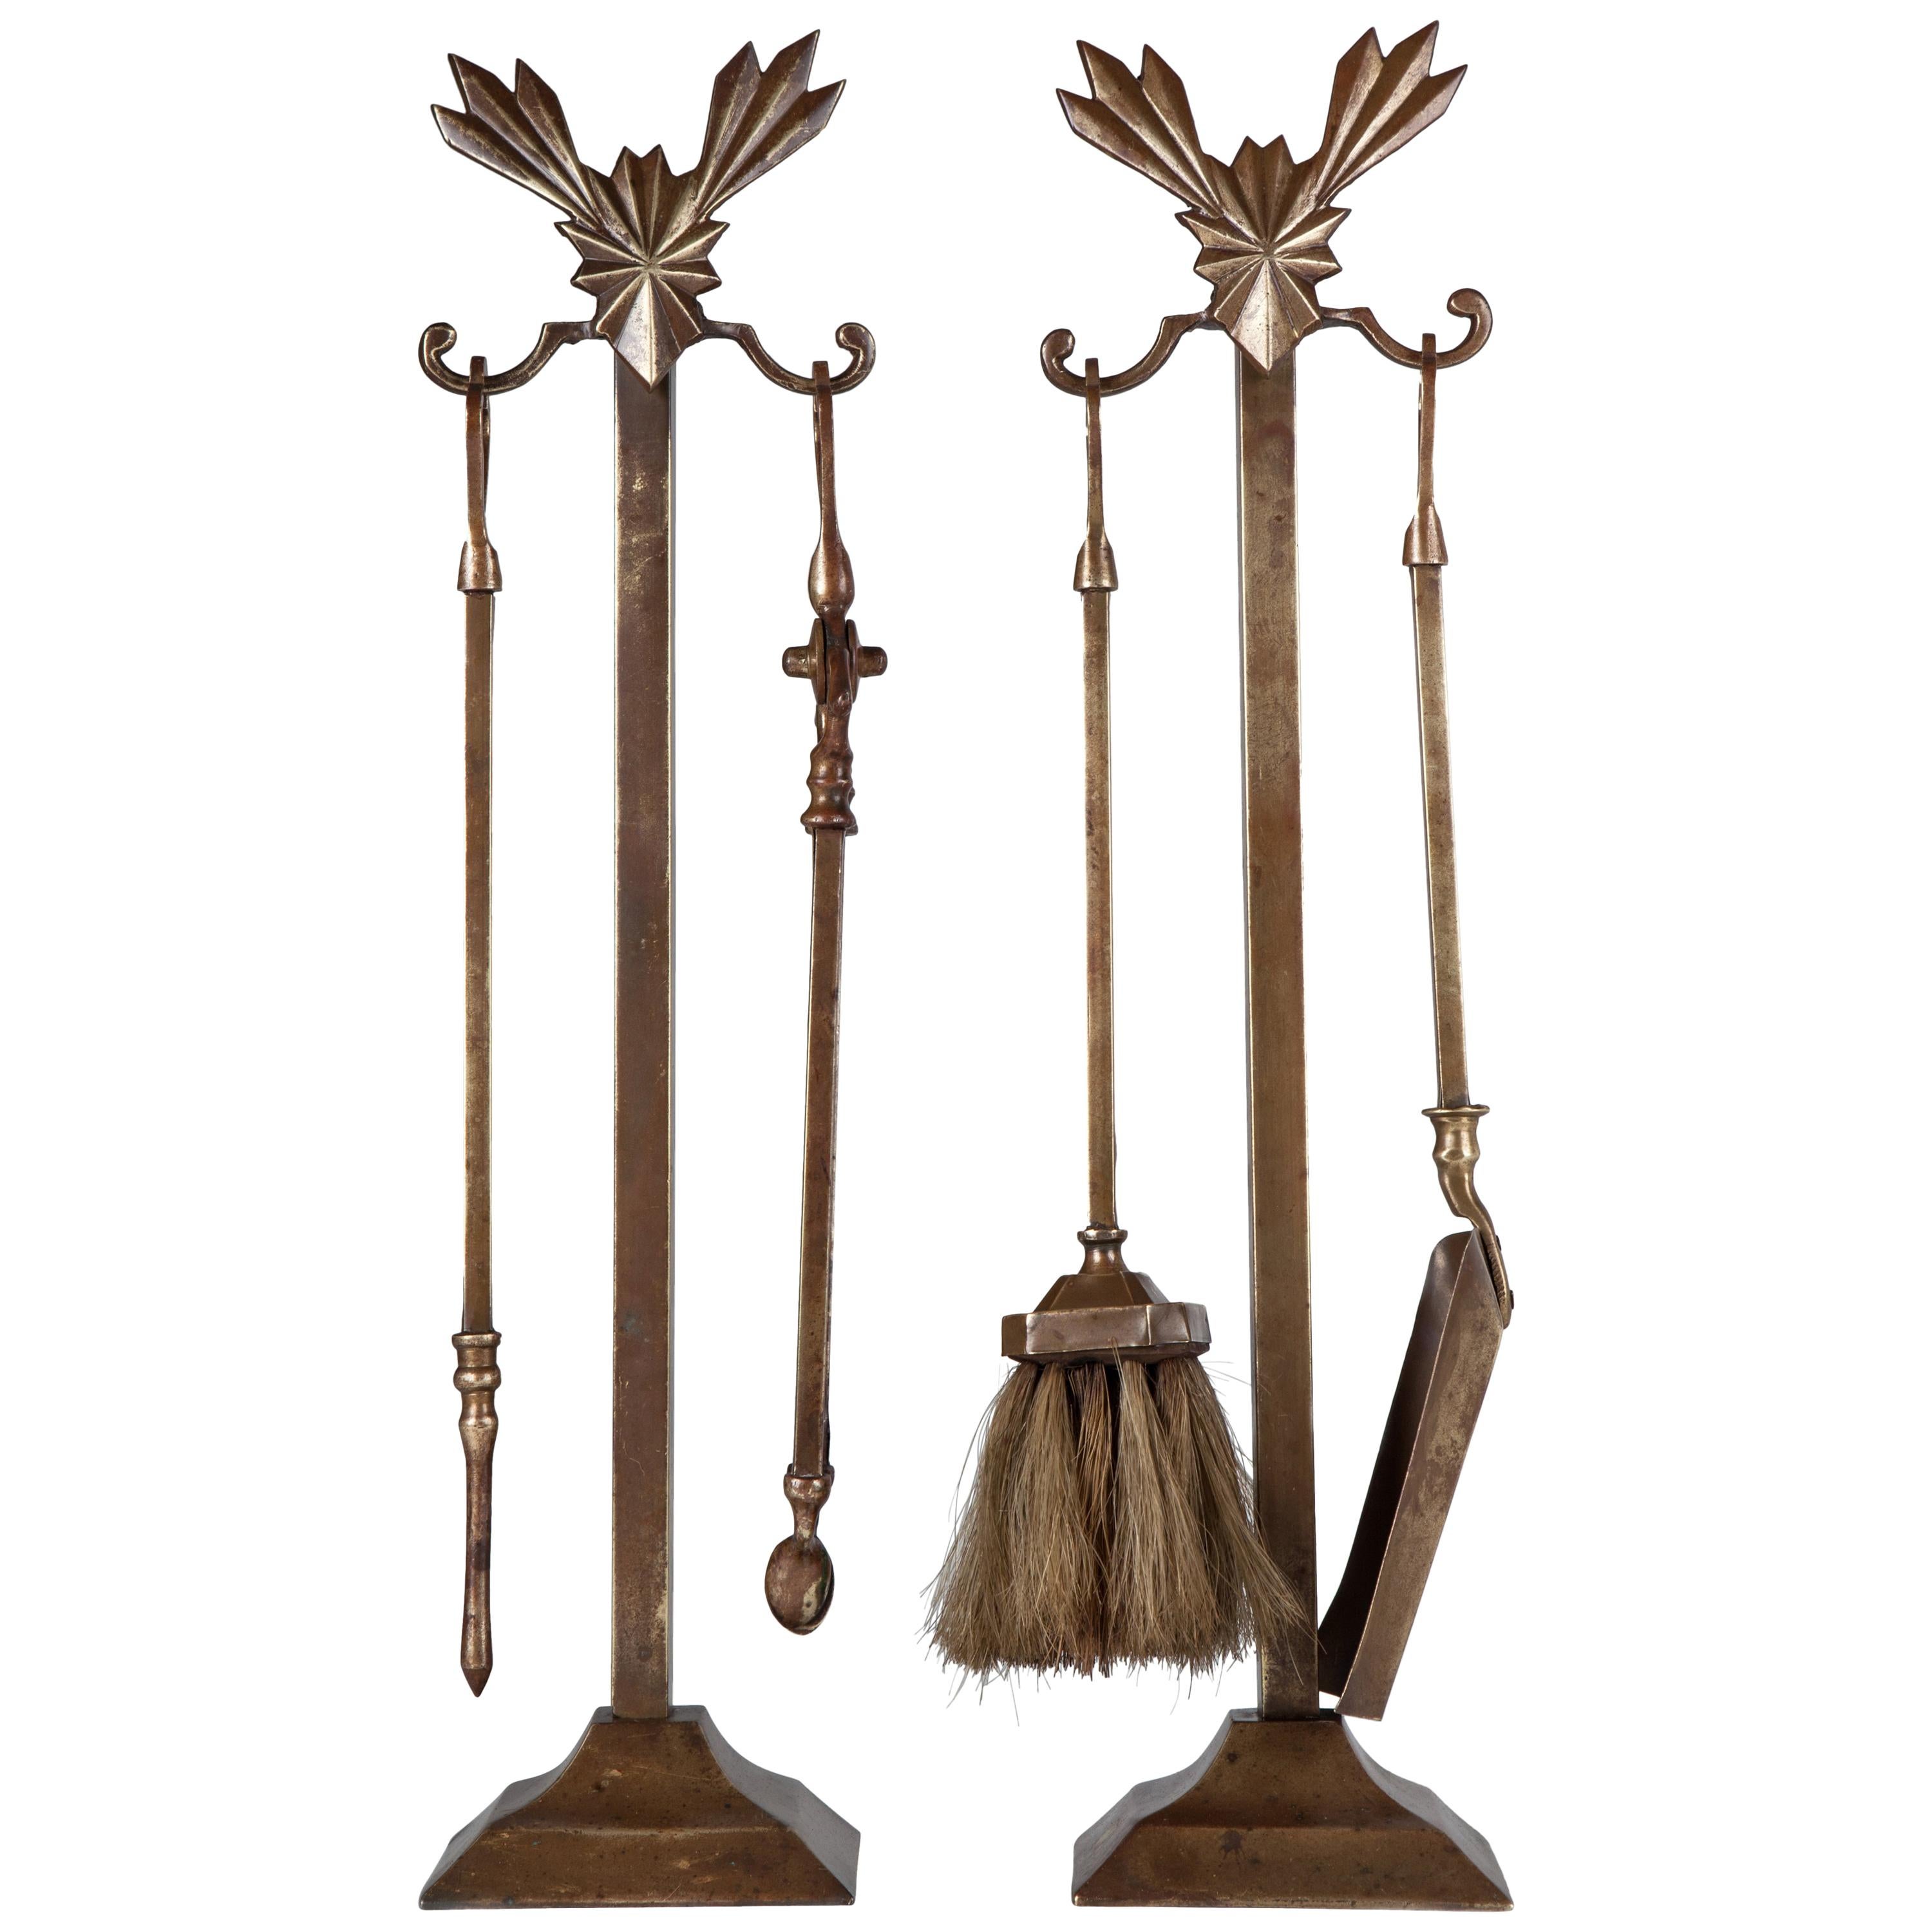 Four Piece Cast Brass Art Deco Fireplace Tool Set with Two Stands, c. 1930s For Sale